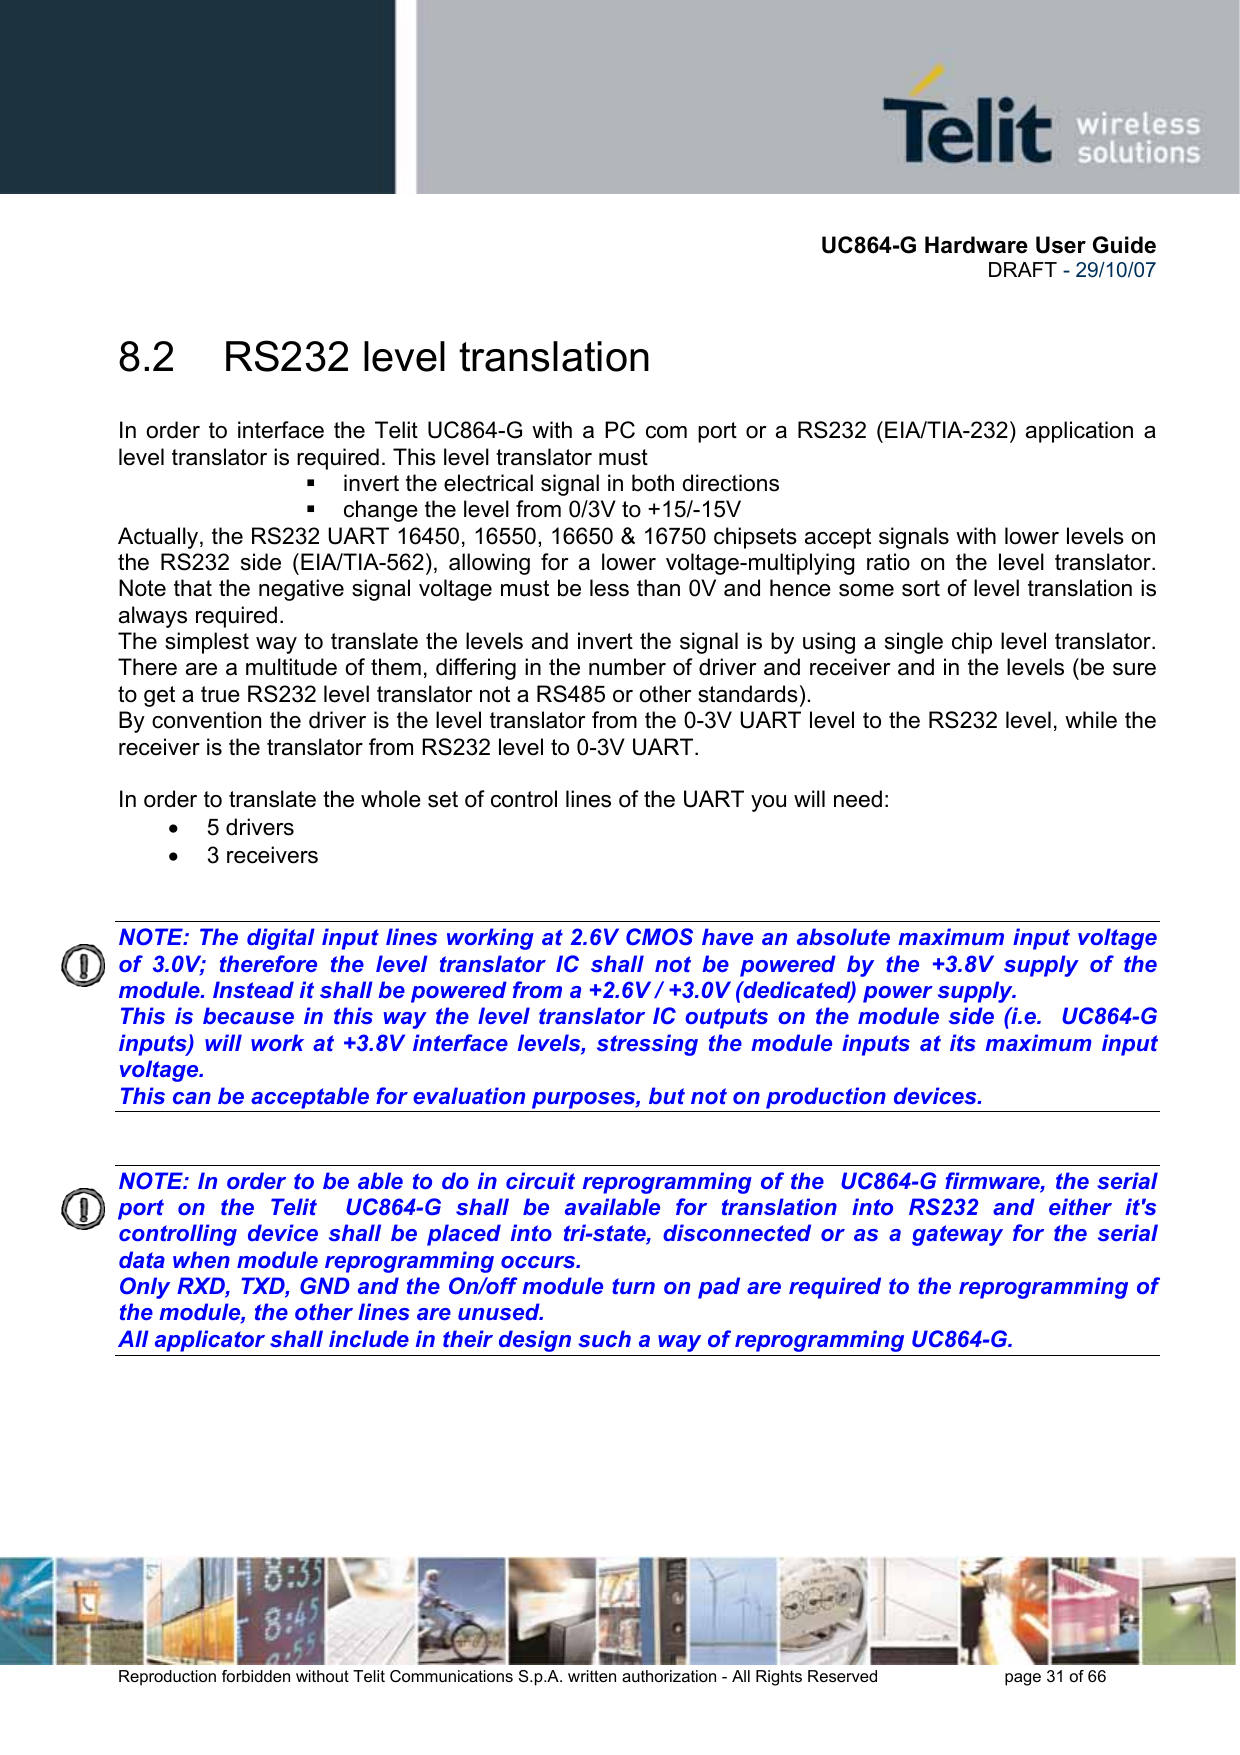       UC864-G Hardware User Guide  DRAFT - 29/10/07      Reproduction forbidden without Telit Communications S.p.A. written authorization - All Rights Reserved    page 31 of 66  8.2  RS232 level translation In order to interface the Telit UC864-G with a PC com port or a RS232 (EIA/TIA-232) application a level translator is required. This level translator must   invert the electrical signal in both directions   change the level from 0/3V to +15/-15V  Actually, the RS232 UART 16450, 16550, 16650 &amp; 16750 chipsets accept signals with lower levels on the RS232 side (EIA/TIA-562), allowing for a lower voltage-multiplying ratio on the level translator. Note that the negative signal voltage must be less than 0V and hence some sort of level translation is always required.  The simplest way to translate the levels and invert the signal is by using a single chip level translator. There are a multitude of them, differing in the number of driver and receiver and in the levels (be sure to get a true RS232 level translator not a RS485 or other standards). By convention the driver is the level translator from the 0-3V UART level to the RS232 level, while the receiver is the translator from RS232 level to 0-3V UART.  In order to translate the whole set of control lines of the UART you will need: • 5 drivers • 3 receivers   NOTE: The digital input lines working at 2.6V CMOS have an absolute maximum input voltage of 3.0V; therefore the level translator IC shall not be powered by the +3.8V supply of the module. Instead it shall be powered from a +2.6V / +3.0V (dedicated) power supply. This is because in this way the level translator IC outputs on the module side (i.e.  UC864-G inputs) will work at +3.8V interface levels, stressing the module inputs at its maximum input voltage. This can be acceptable for evaluation purposes, but not on production devices.   NOTE: In order to be able to do in circuit reprogramming of the  UC864-G firmware, the serial port on the Telit  UC864-G shall be available for translation into RS232 and either it&apos;s controlling device shall be placed into tri-state, disconnected or as a gateway for the serial data when module reprogramming occurs. Only RXD, TXD, GND and the On/off module turn on pad are required to the reprogramming of the module, the other lines are unused. All applicator shall include in their design such a way of reprogramming UC864-G.    